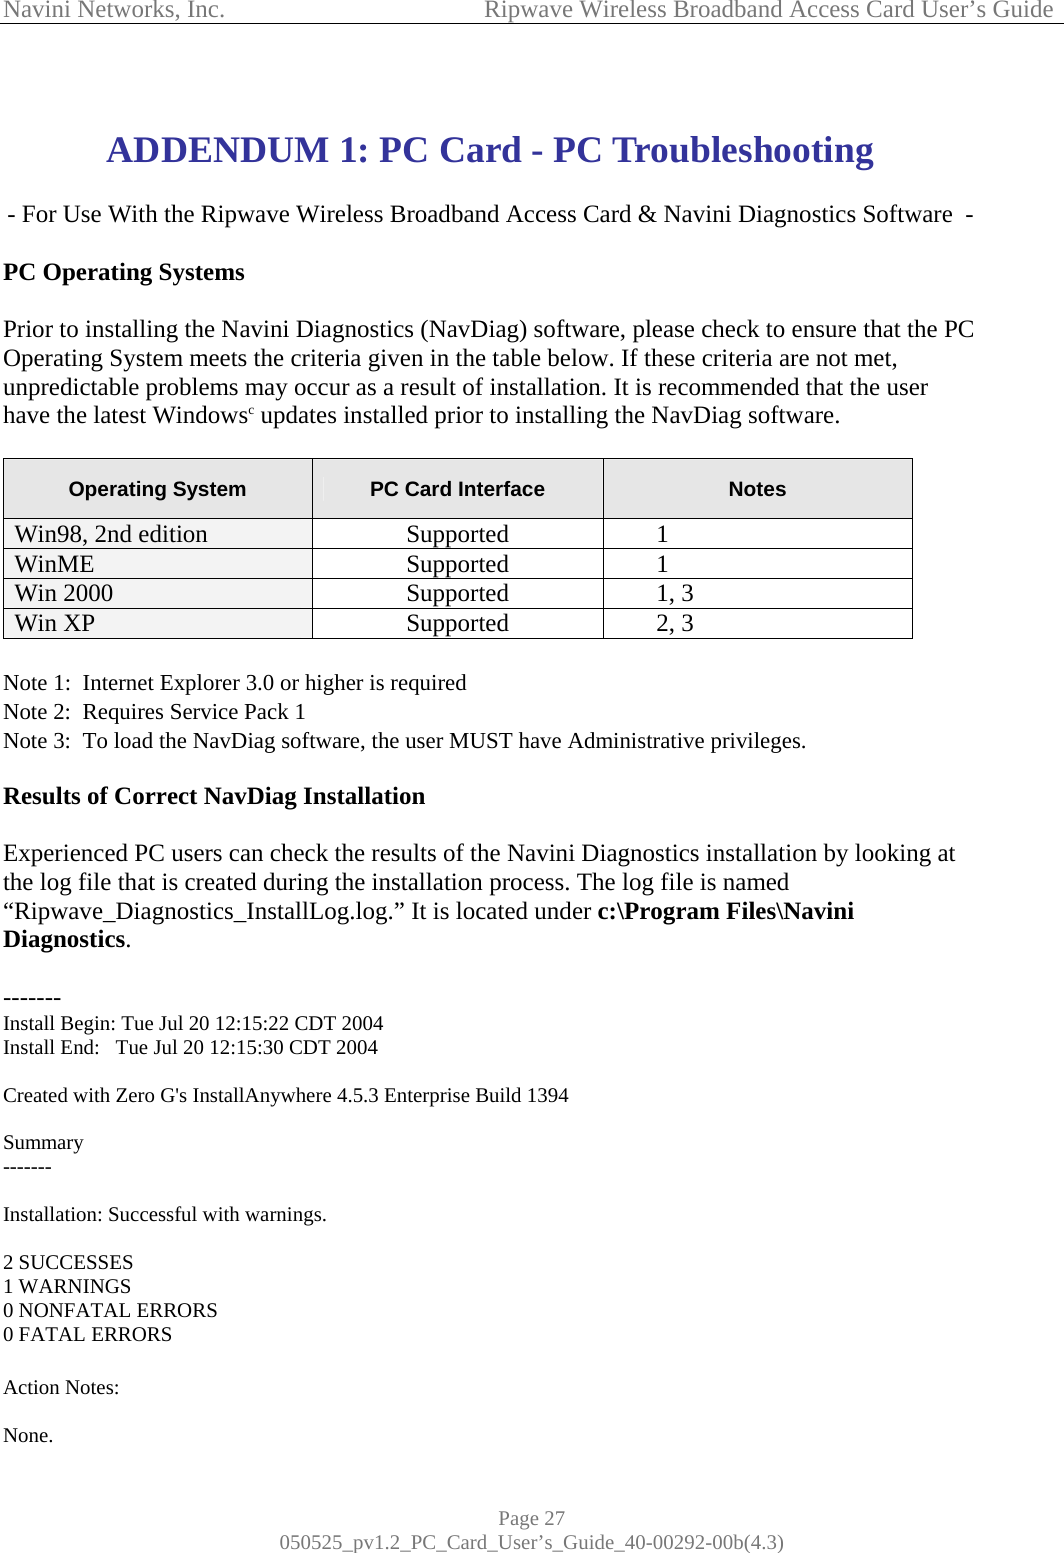 Navini Networks, Inc.            Ripwave Wireless Broadband Access Card User’s Guide Page 27 050525_pv1.2_PC_Card_User’s_Guide_40-00292-00b(4.3)  ADDENDUM 1: PC Card - PC Troubleshooting  - For Use With the Ripwave Wireless Broadband Access Card &amp; Navini Diagnostics Software  -  PC Operating Systems  Prior to installing the Navini Diagnostics (NavDiag) software, please check to ensure that the PC Operating System meets the criteria given in the table below. If these criteria are not met, unpredictable problems may occur as a result of installation. It is recommended that the user have the latest Windowsc updates installed prior to installing the NavDiag software.  Operating System  PC Card Interface  Notes Win98, 2nd edition  Supported 1 WinME    Supported 1 Win 2000  Supported 1, 3 Win XP  Supported 2, 3  Note 1:  Internet Explorer 3.0 or higher is required Note 2:  Requires Service Pack 1 Note 3:  To load the NavDiag software, the user MUST have Administrative privileges.  Results of Correct NavDiag Installation  Experienced PC users can check the results of the Navini Diagnostics installation by looking at the log file that is created during the installation process. The log file is named “Ripwave_Diagnostics_InstallLog.log.” It is located under c:\Program Files\Navini Diagnostics.  ------- Install Begin: Tue Jul 20 12:15:22 CDT 2004 Install End:   Tue Jul 20 12:15:30 CDT 2004  Created with Zero G&apos;s InstallAnywhere 4.5.3 Enterprise Build 1394  Summary -------  Installation: Successful with warnings.  2 SUCCESSES 1 WARNINGS 0 NONFATAL ERRORS 0 FATAL ERRORS  Action Notes:  None. 